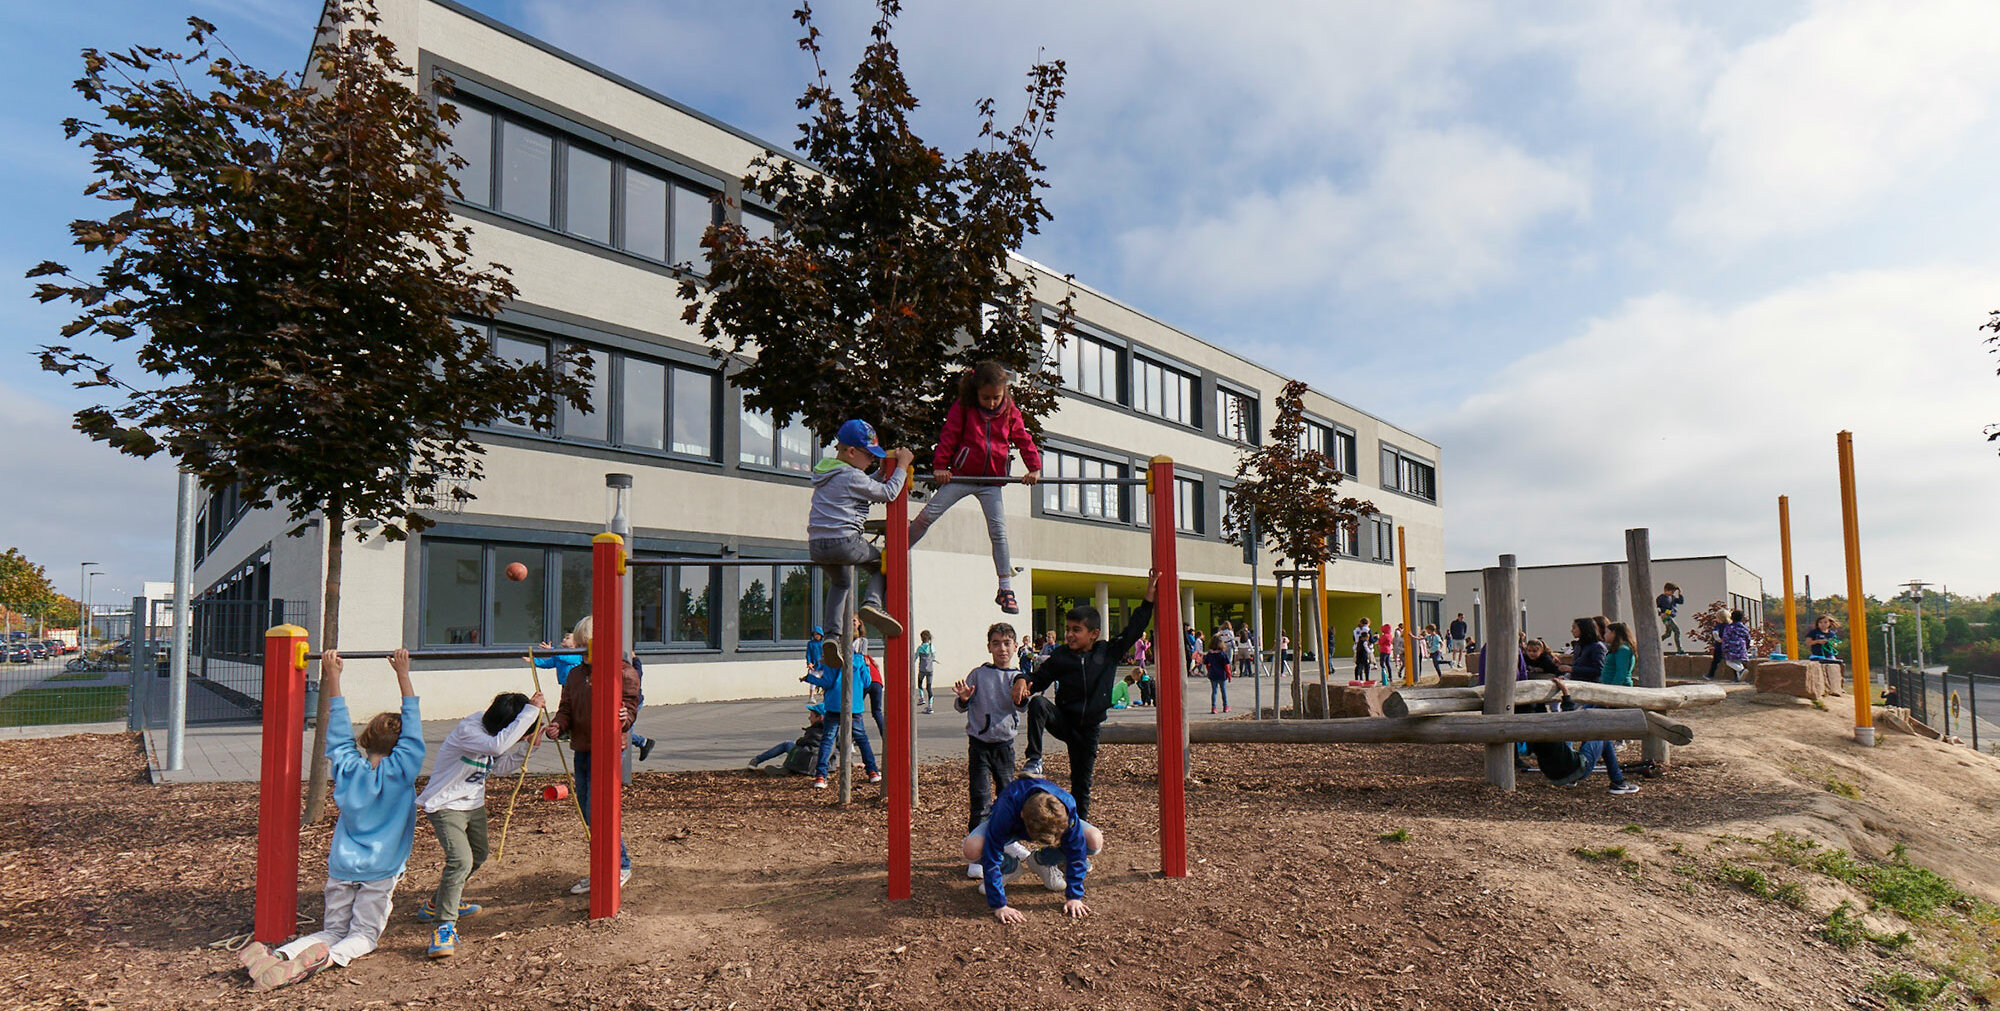 View of the school building from the outside. A playground can be seen in the foreground.